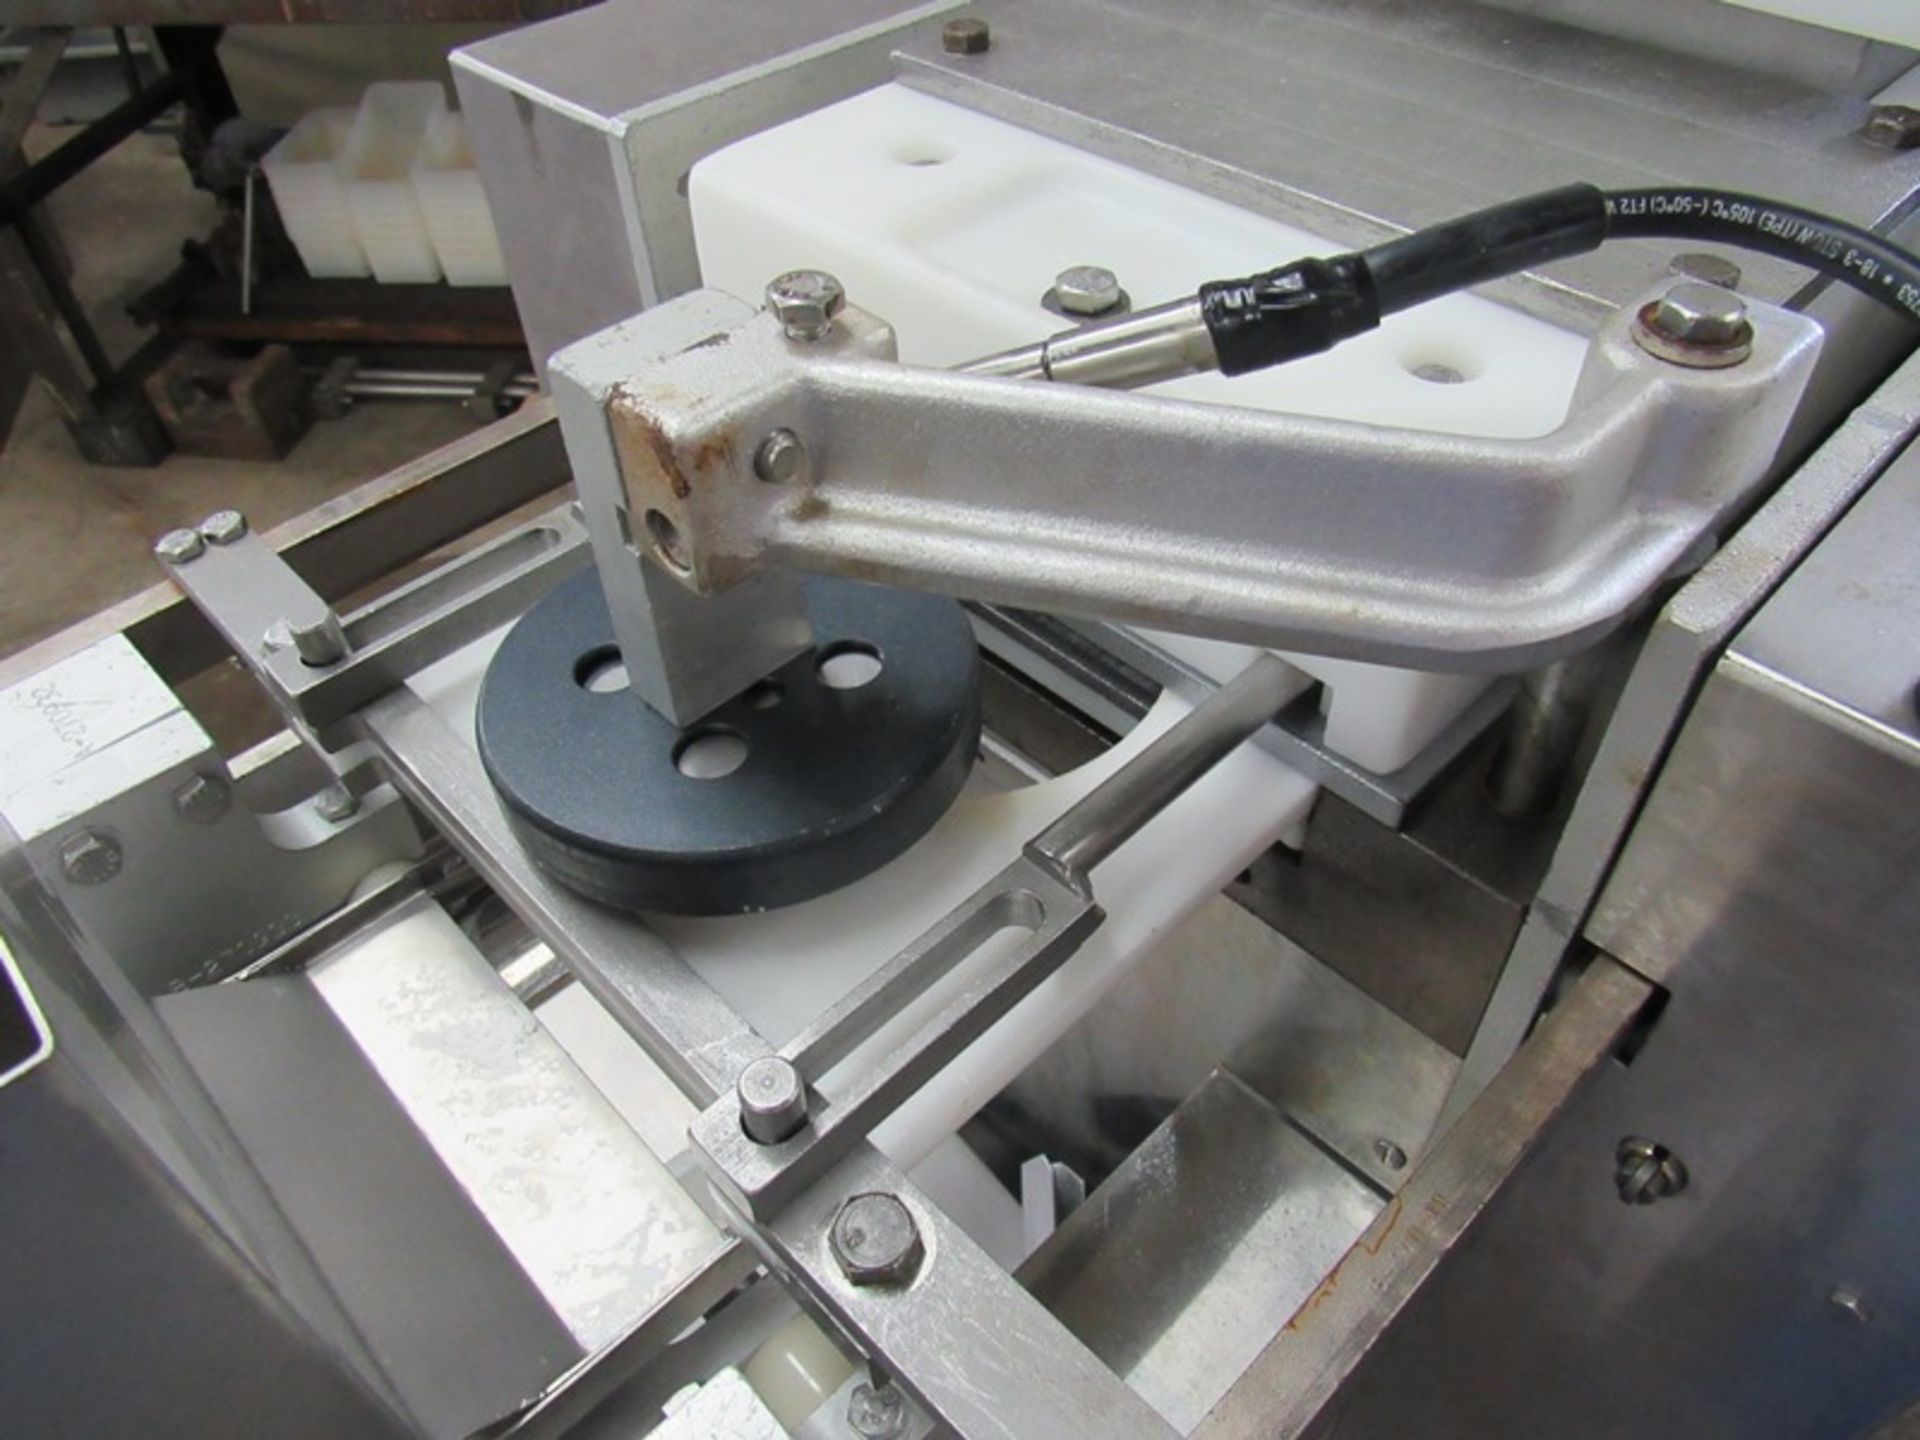 Nutec Mdl. 710 Portable Patty Forming Machine with paper feed setup with 4 1/2" diameter X 3/8" - Image 8 of 10